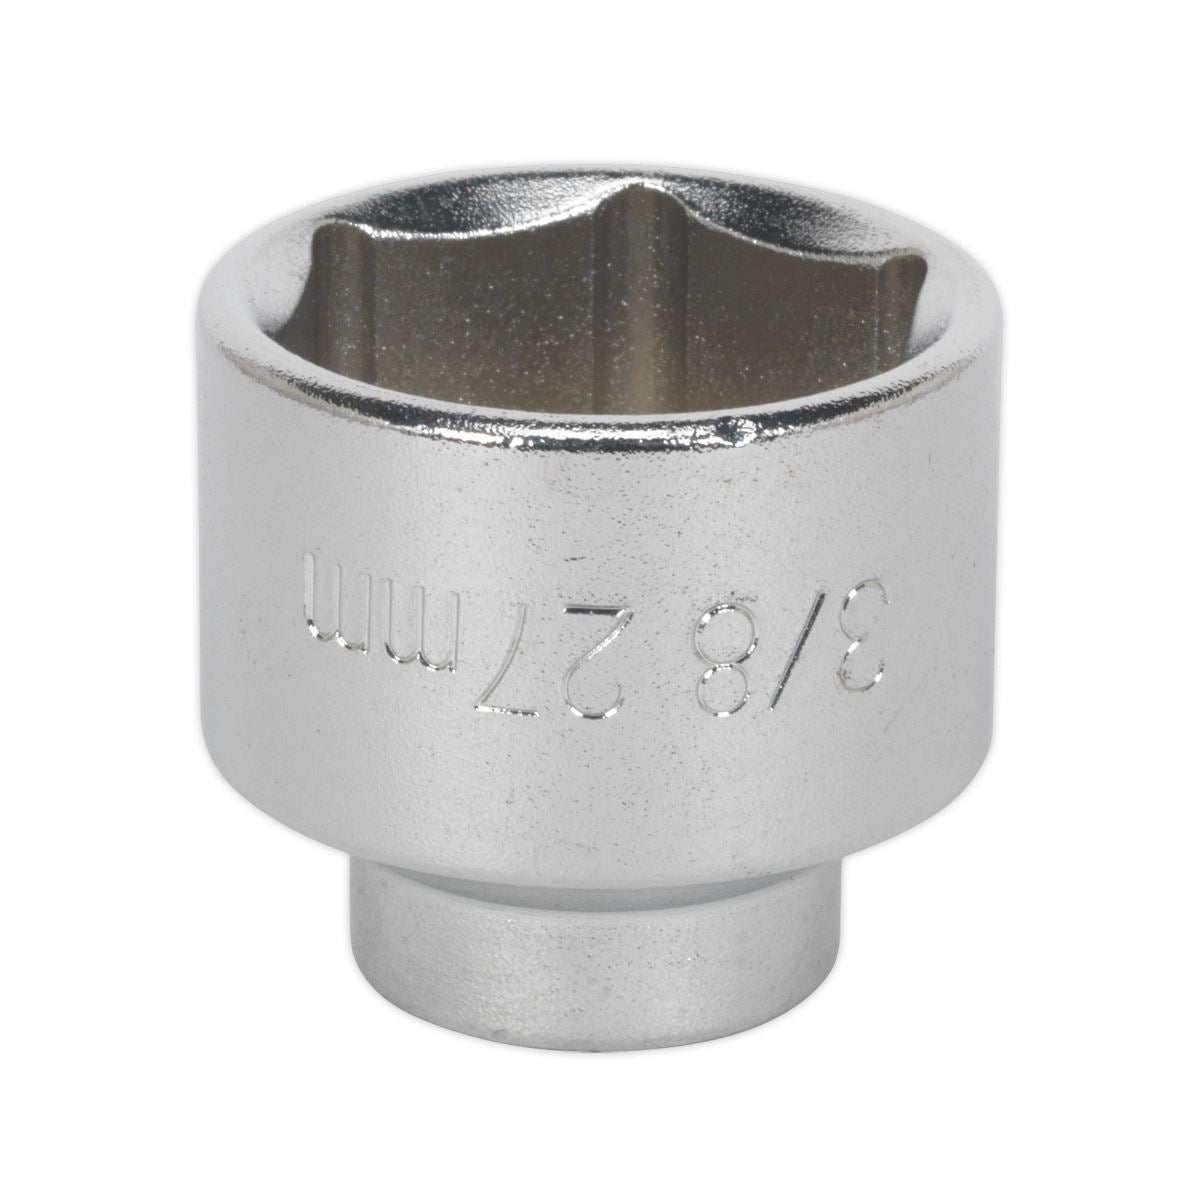 Sealey Low Profile Oil Filter Socket 27mm 3/8" Square Drive A Class Garage